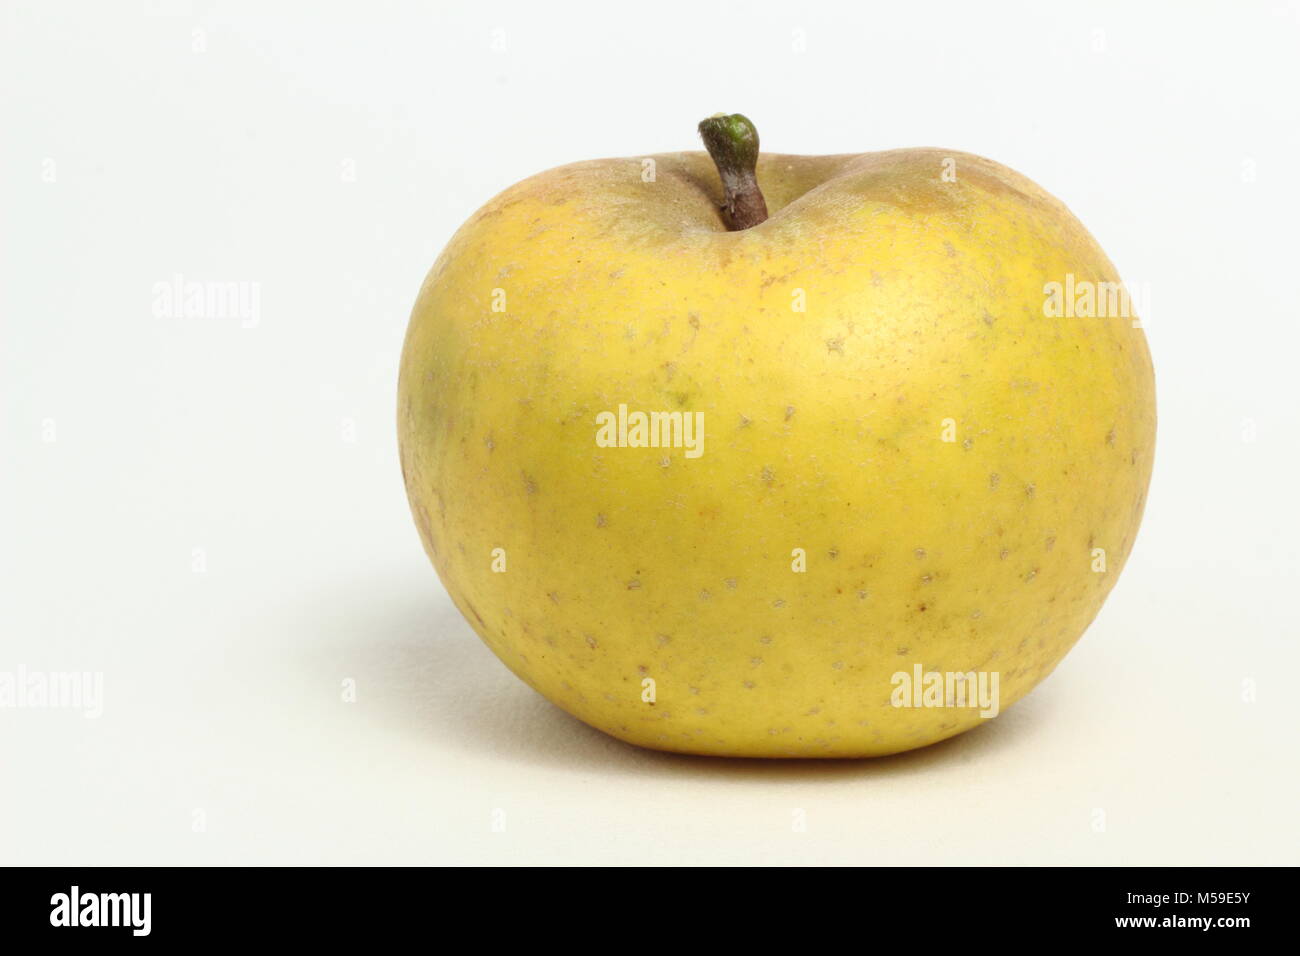 Malus domestica 'Orleans Reinette', an heirloom French apple variety. White background Stock Photo